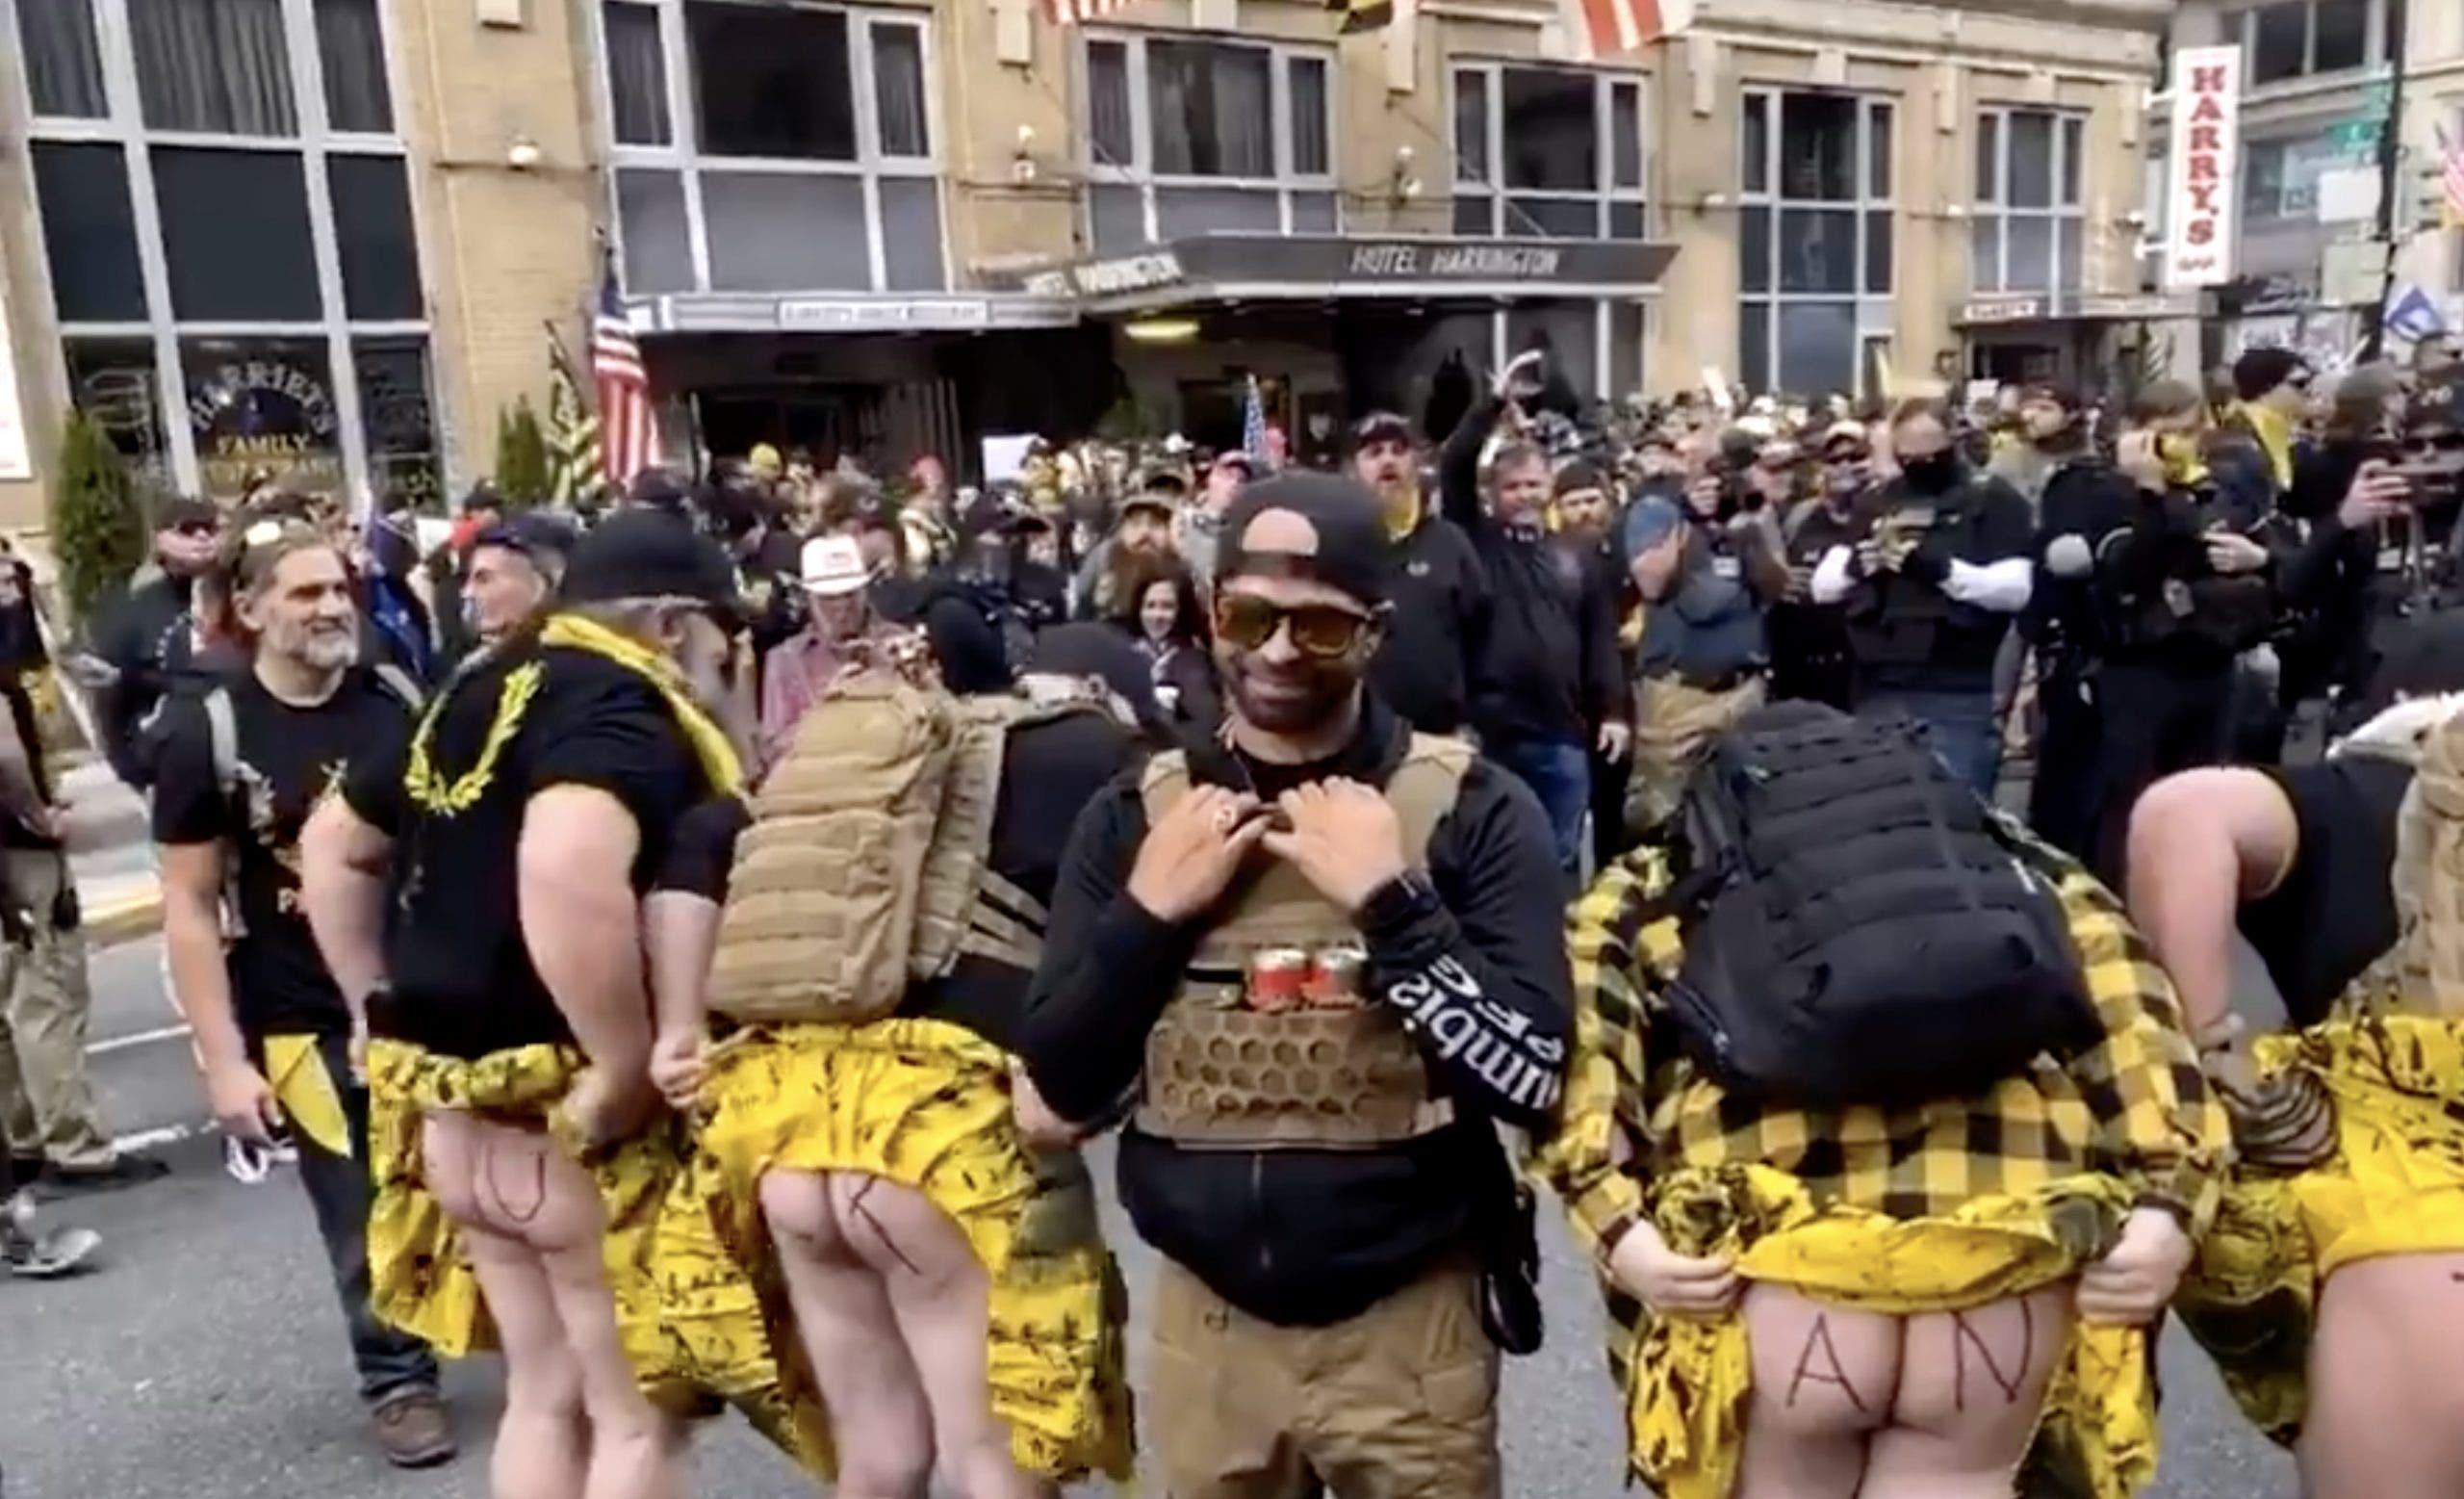 Proud Boys show off their kilts and much more in tasteless protest against Antifa...